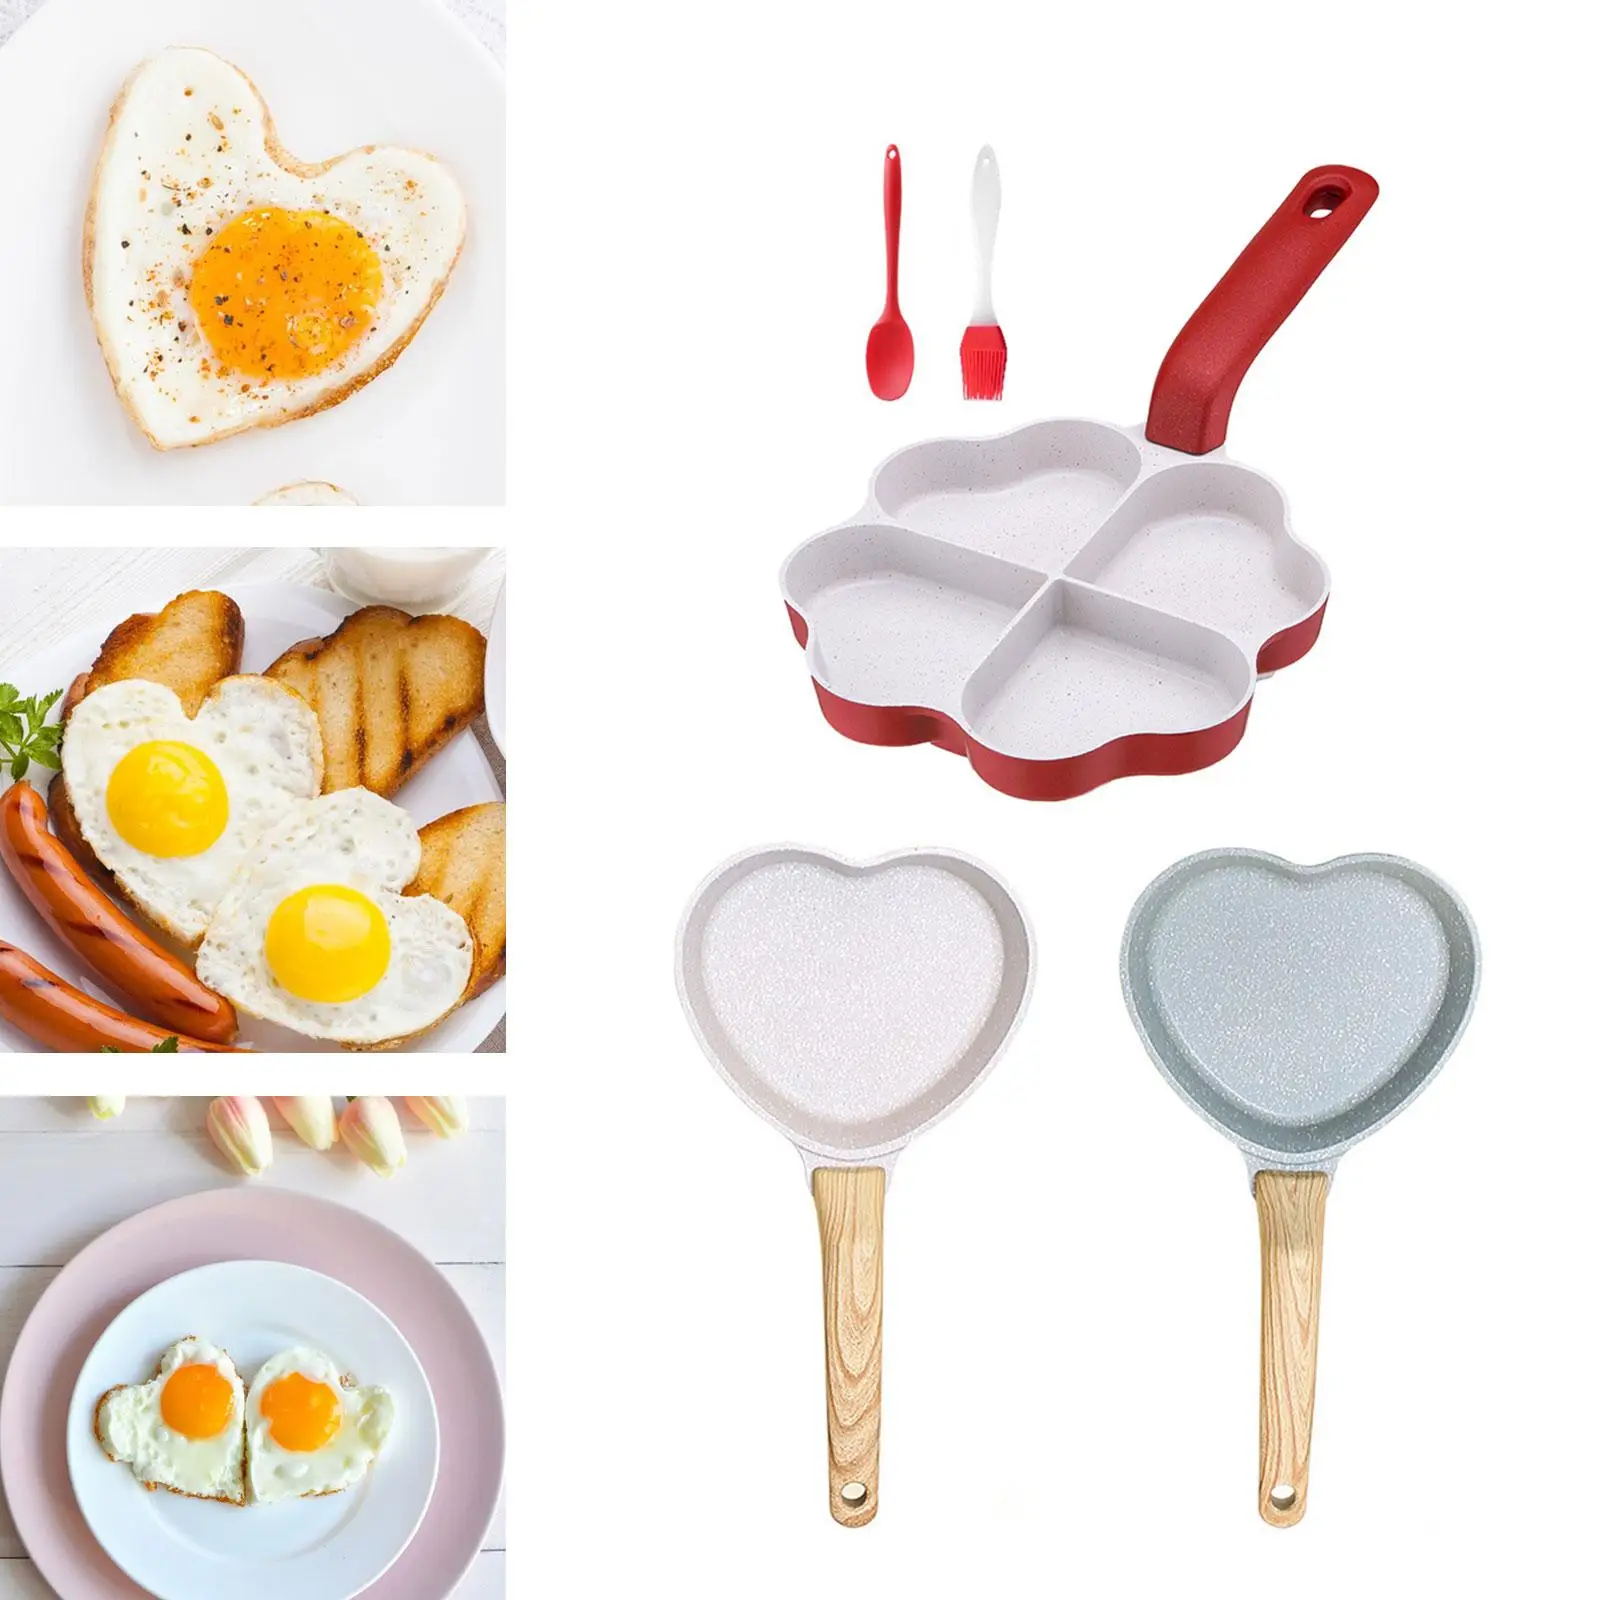 Egg Frying Pan Nonstick Cookware Divided Grill Frying Pan Egg Steak Pot Nonstick Pan for Baking Cooking Frying Vegetable Steak